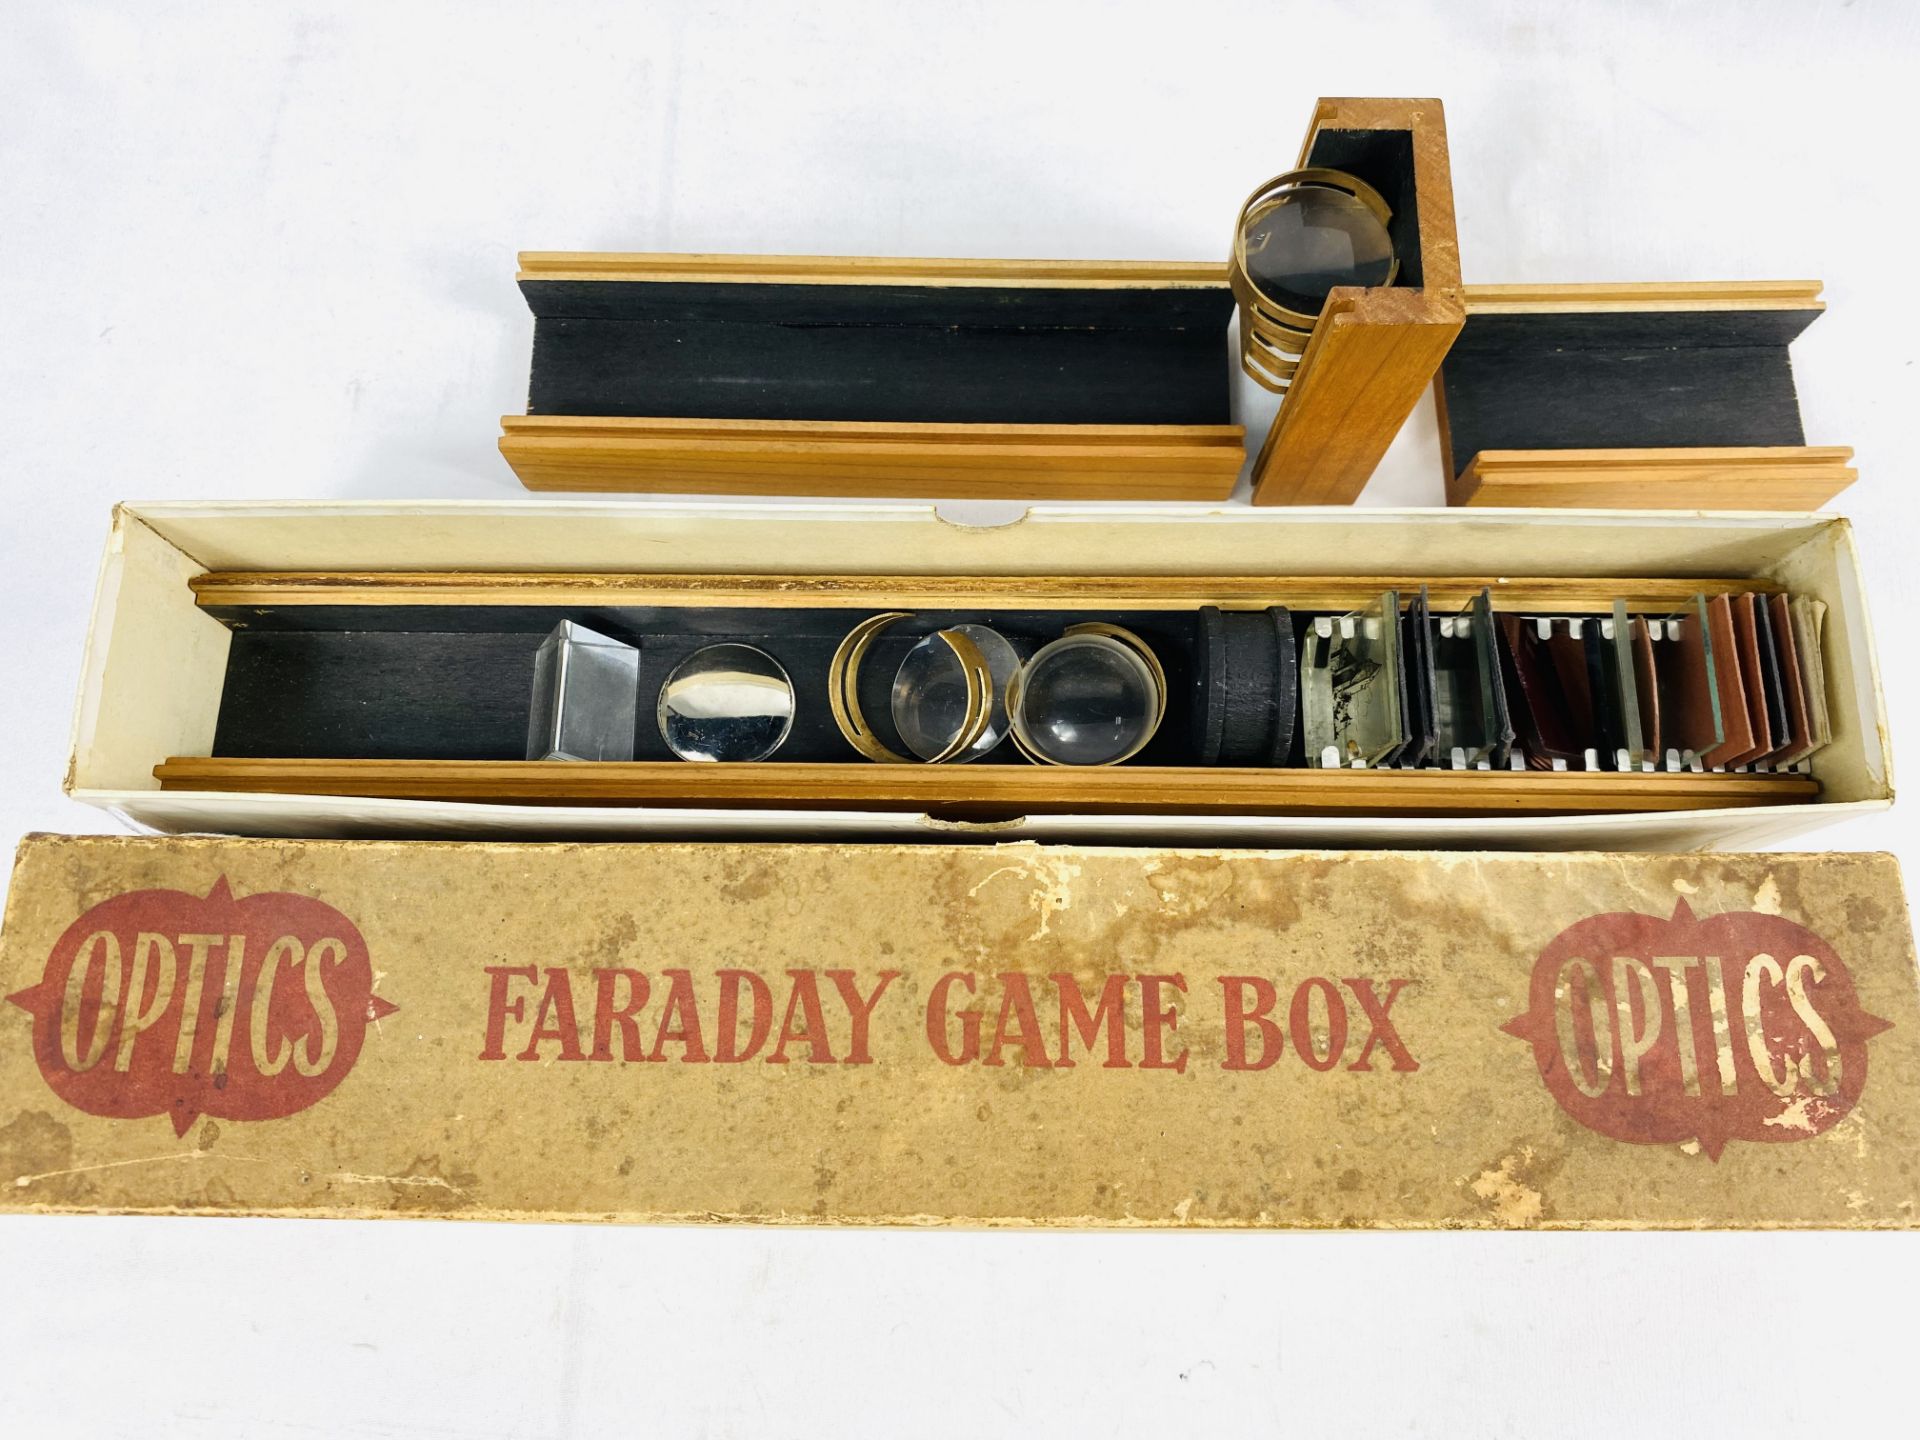 Faraday game box of science optix, with instruction booklet by William Le Gay.